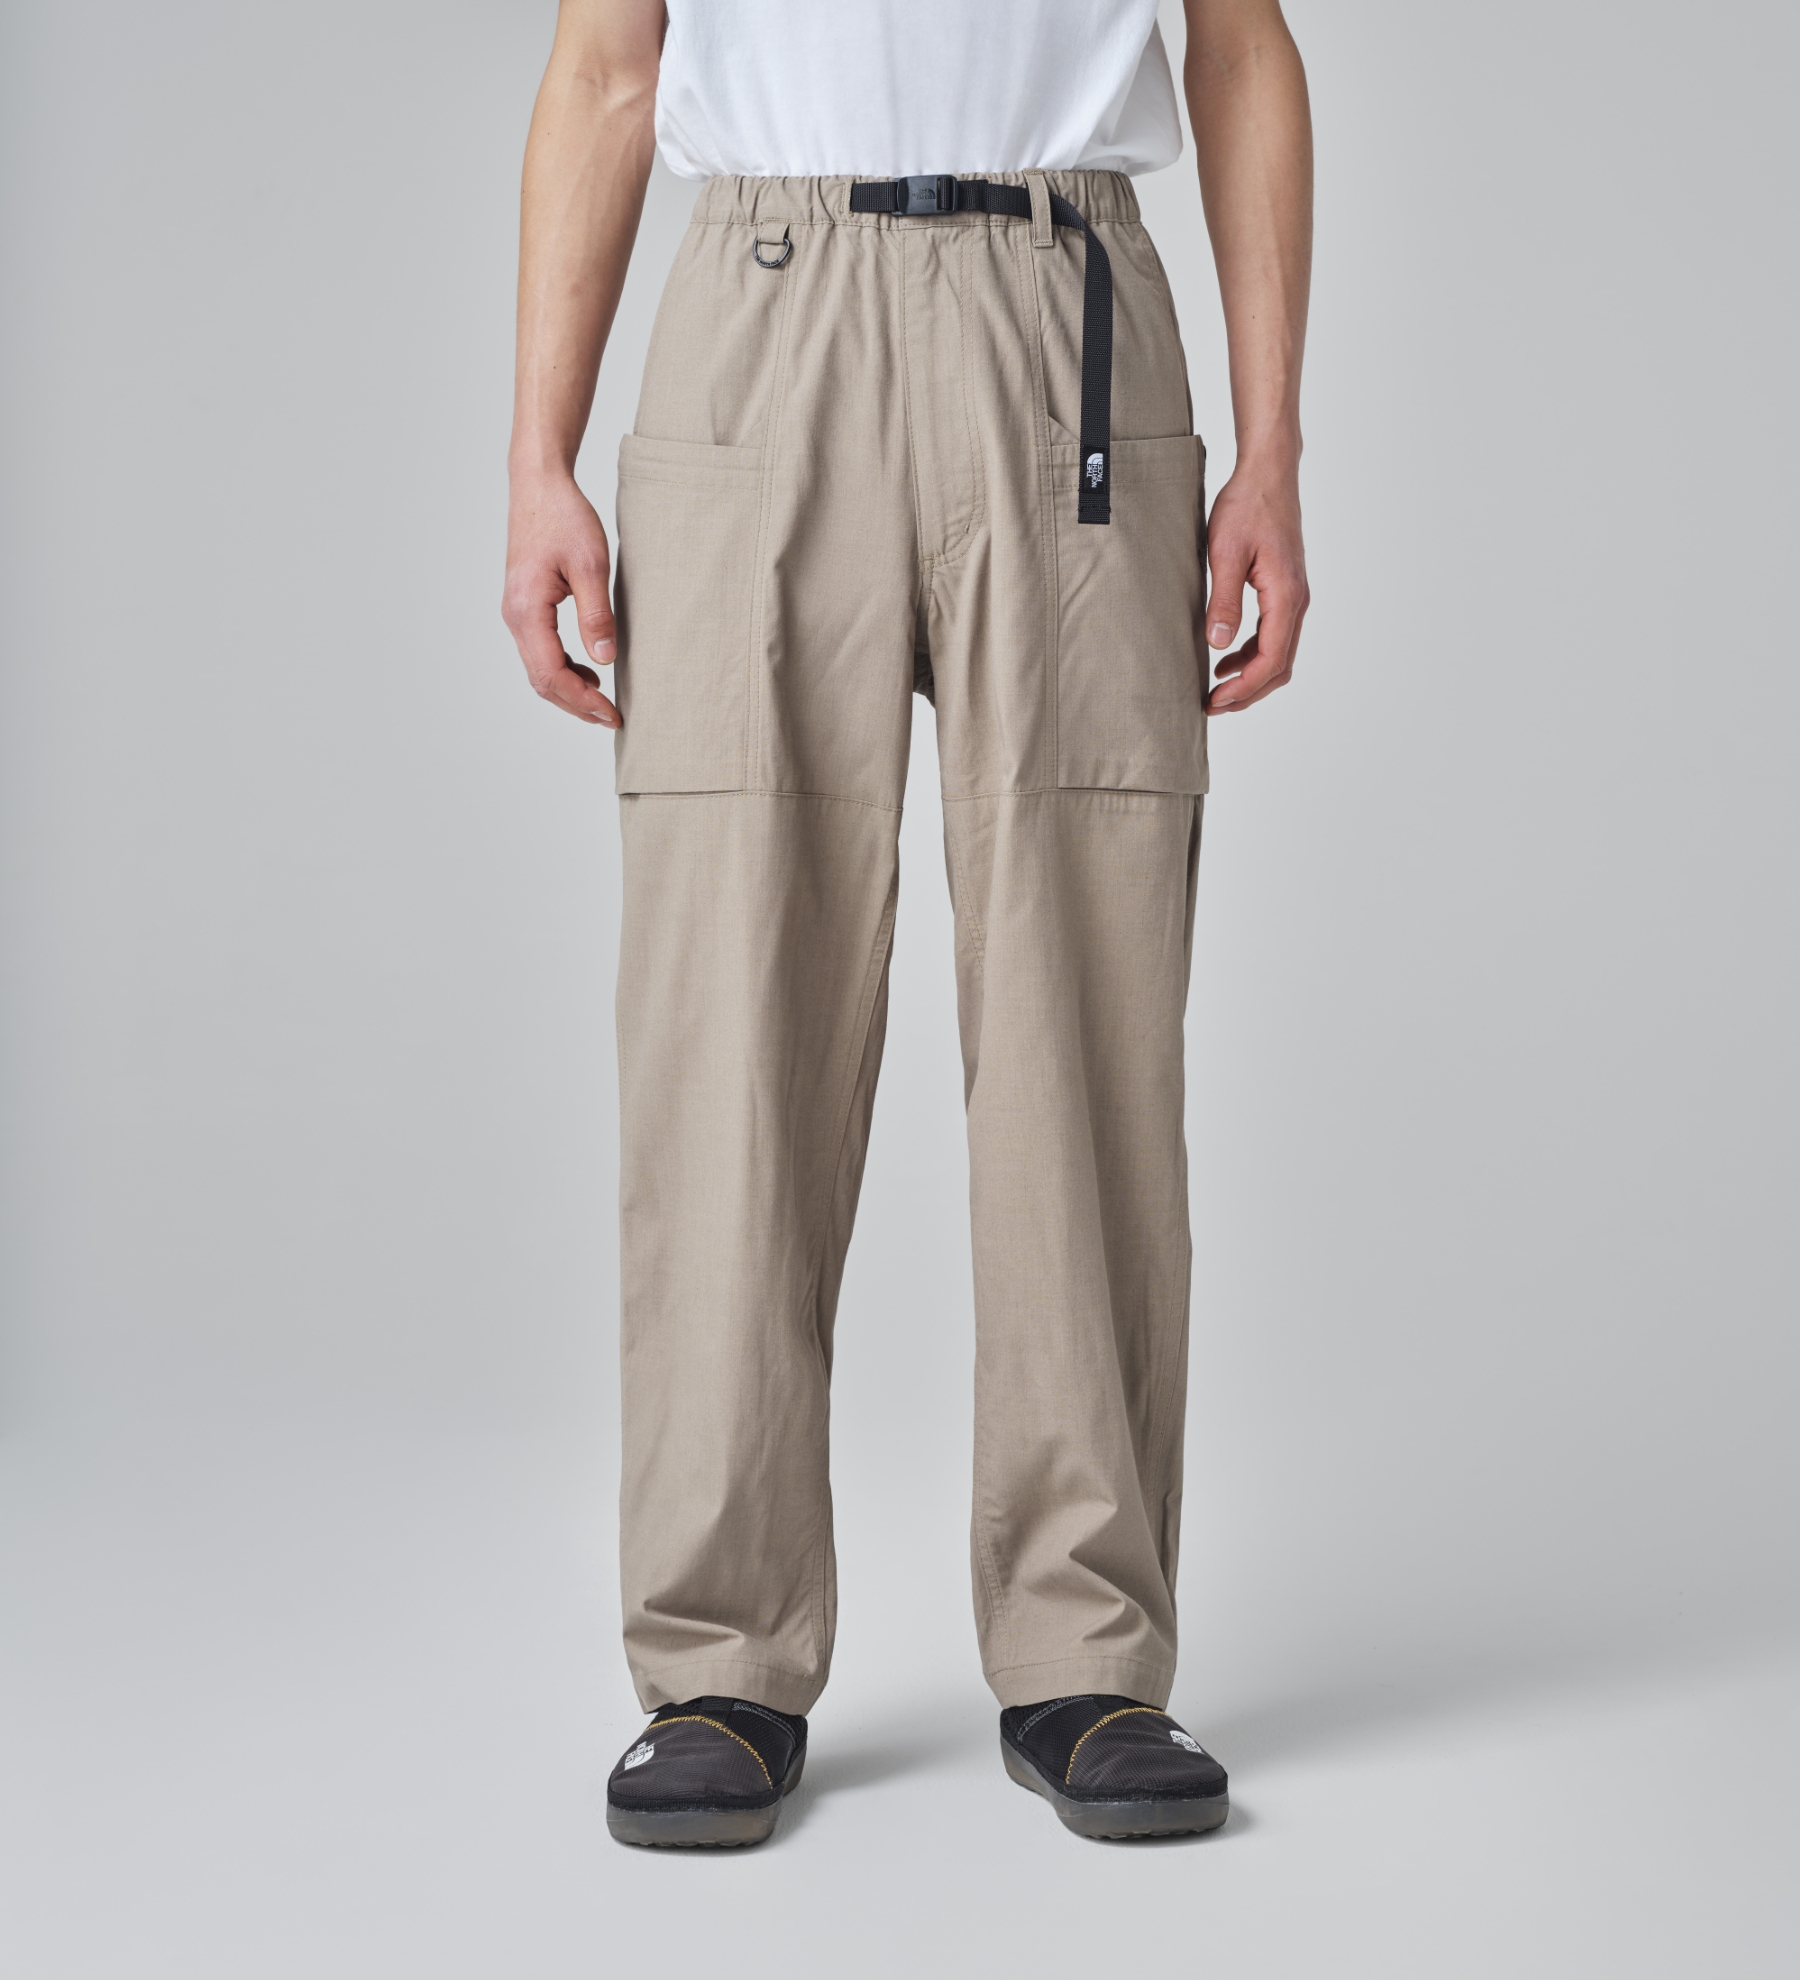 THE NORTH FACE Firefly Storage Pant MN L - ワークパンツ